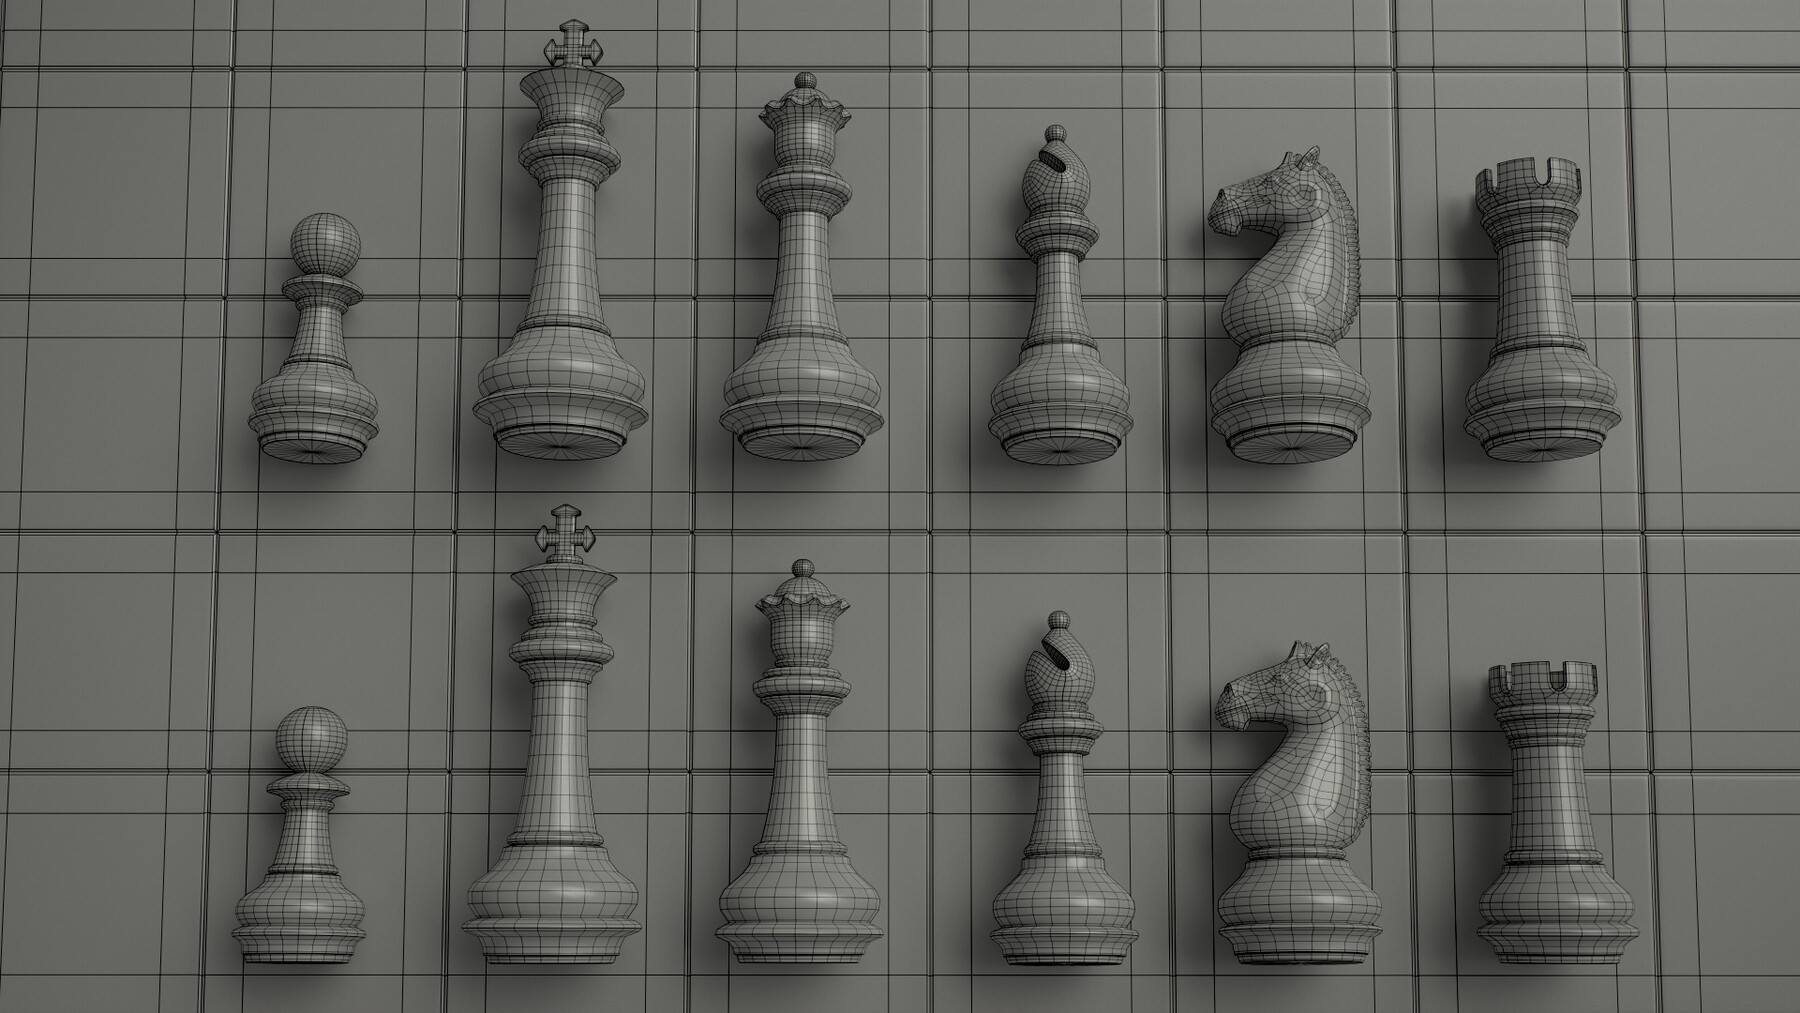 Download 3D Chess Game for PC/3D Chess Game on PC - Andy